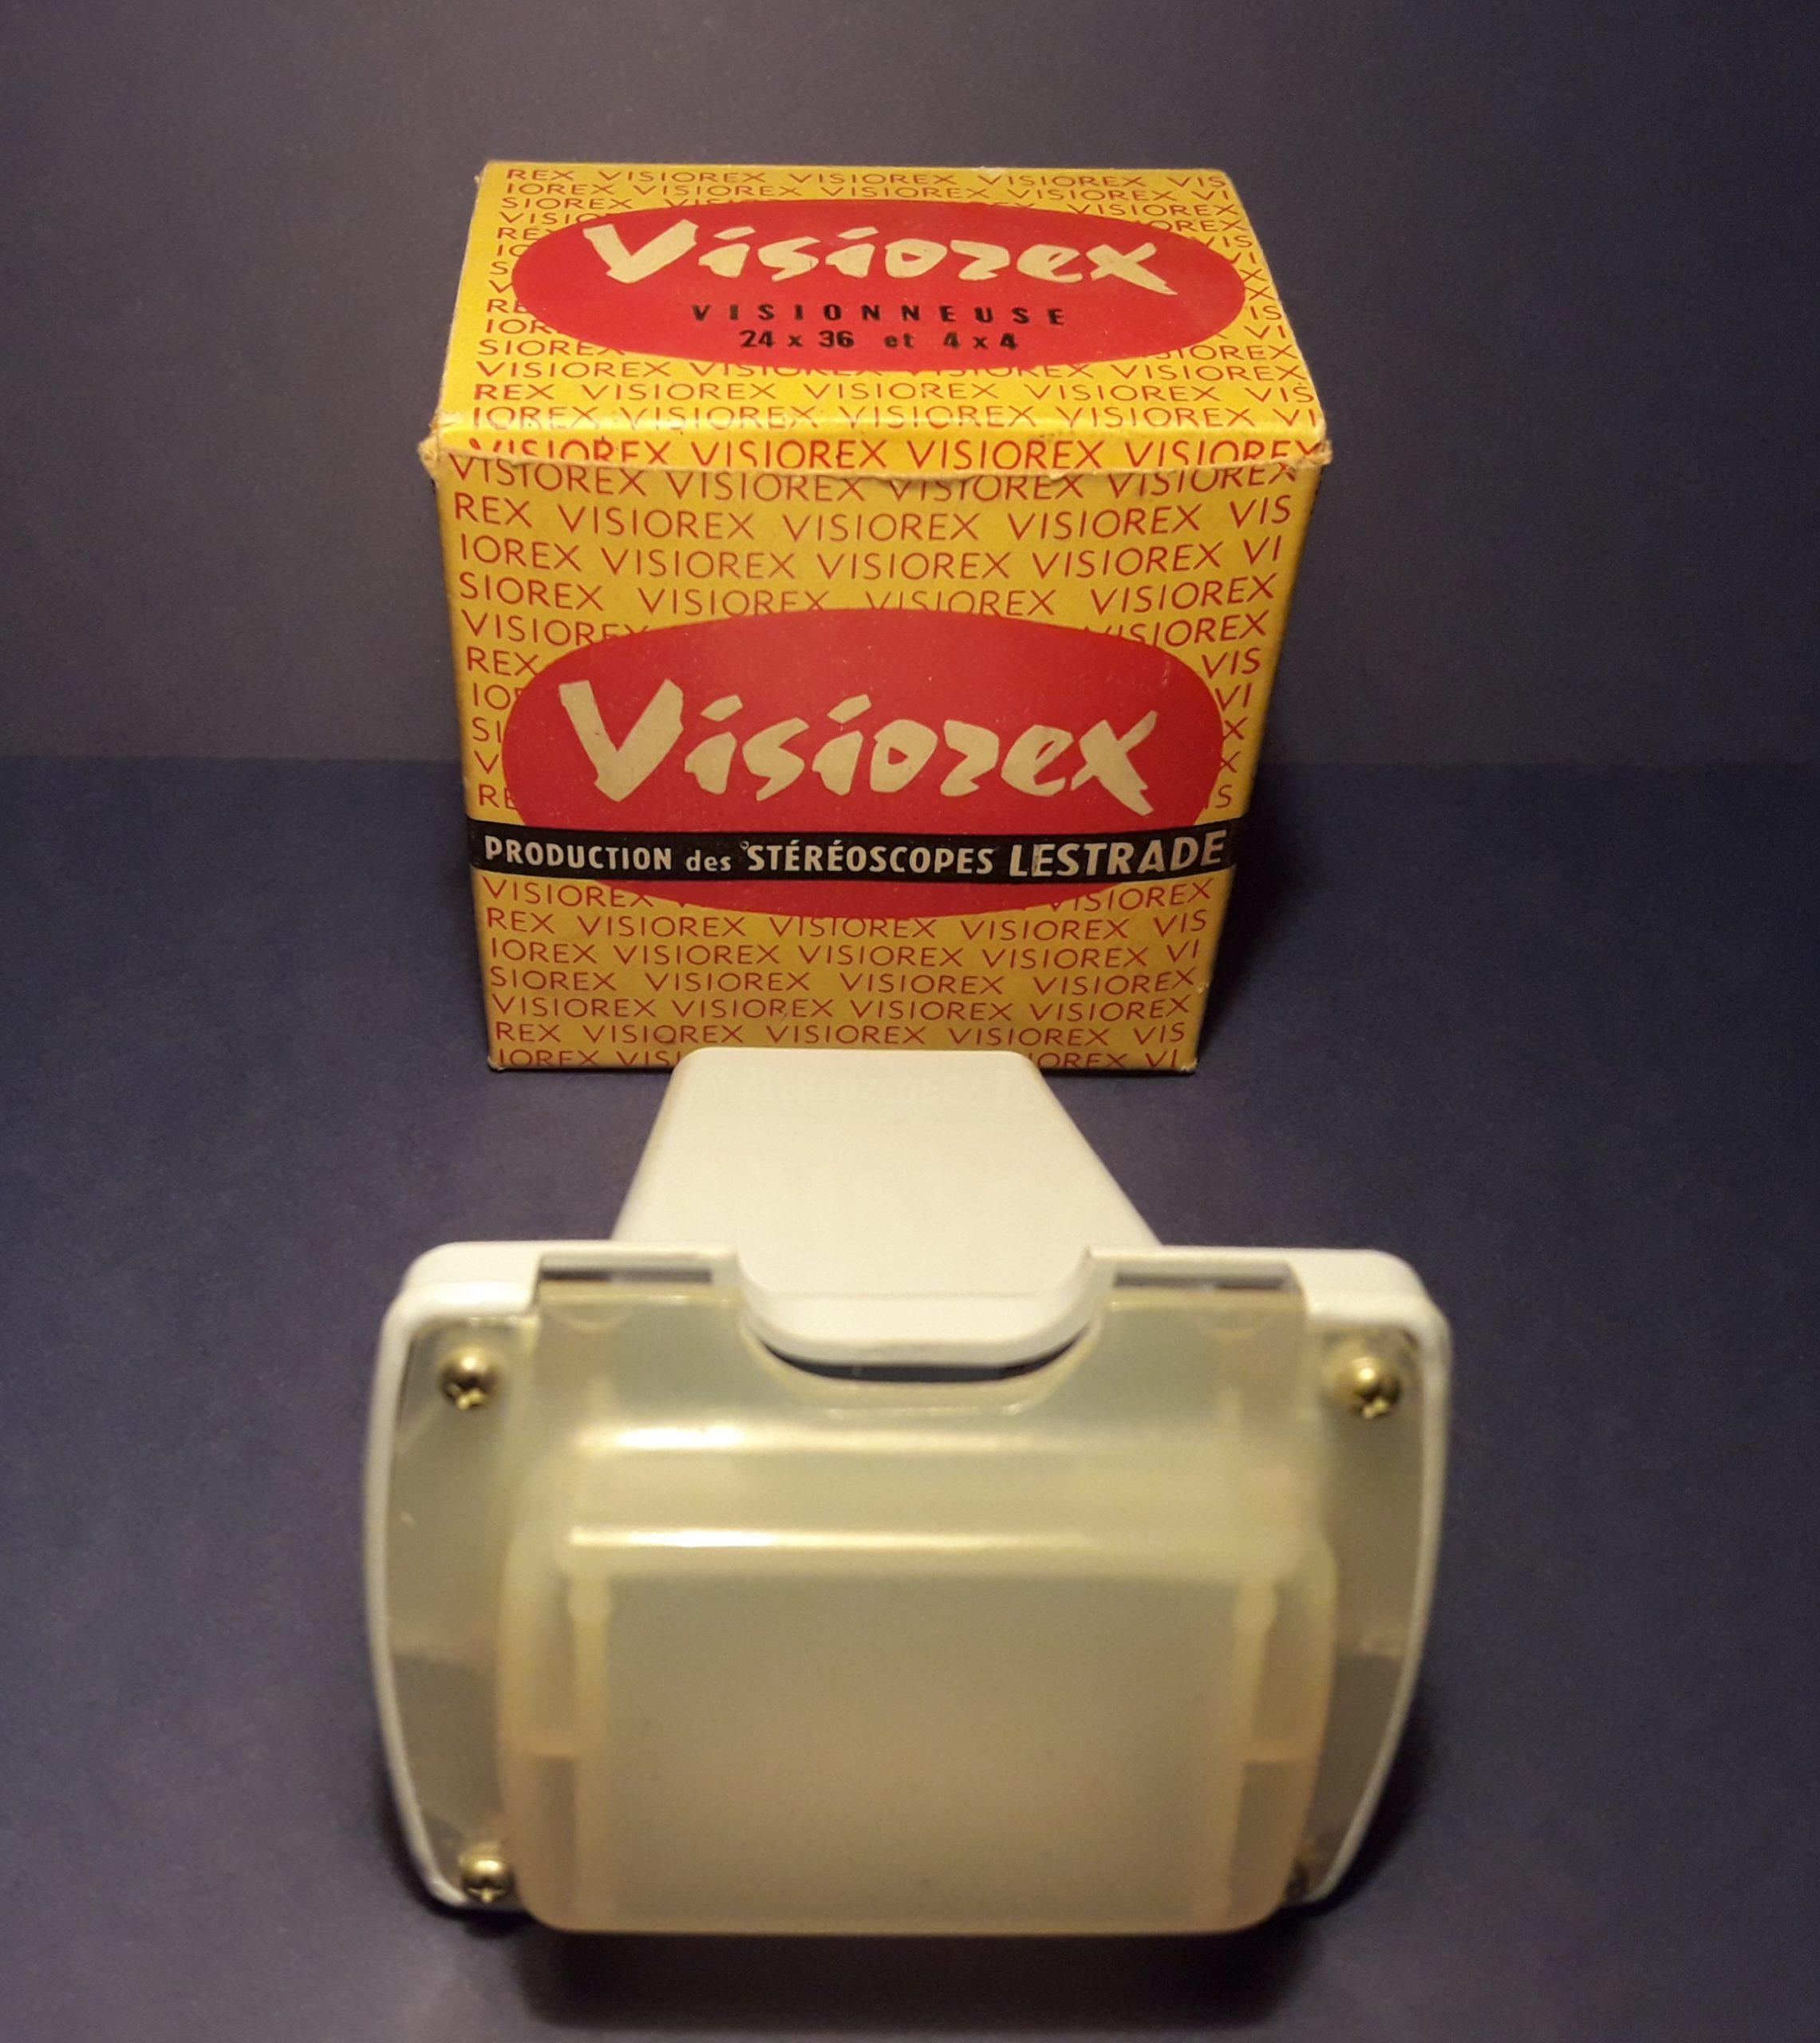 Visionneuse Diapositives Luminex Lestrade - Recyclerie Chiner